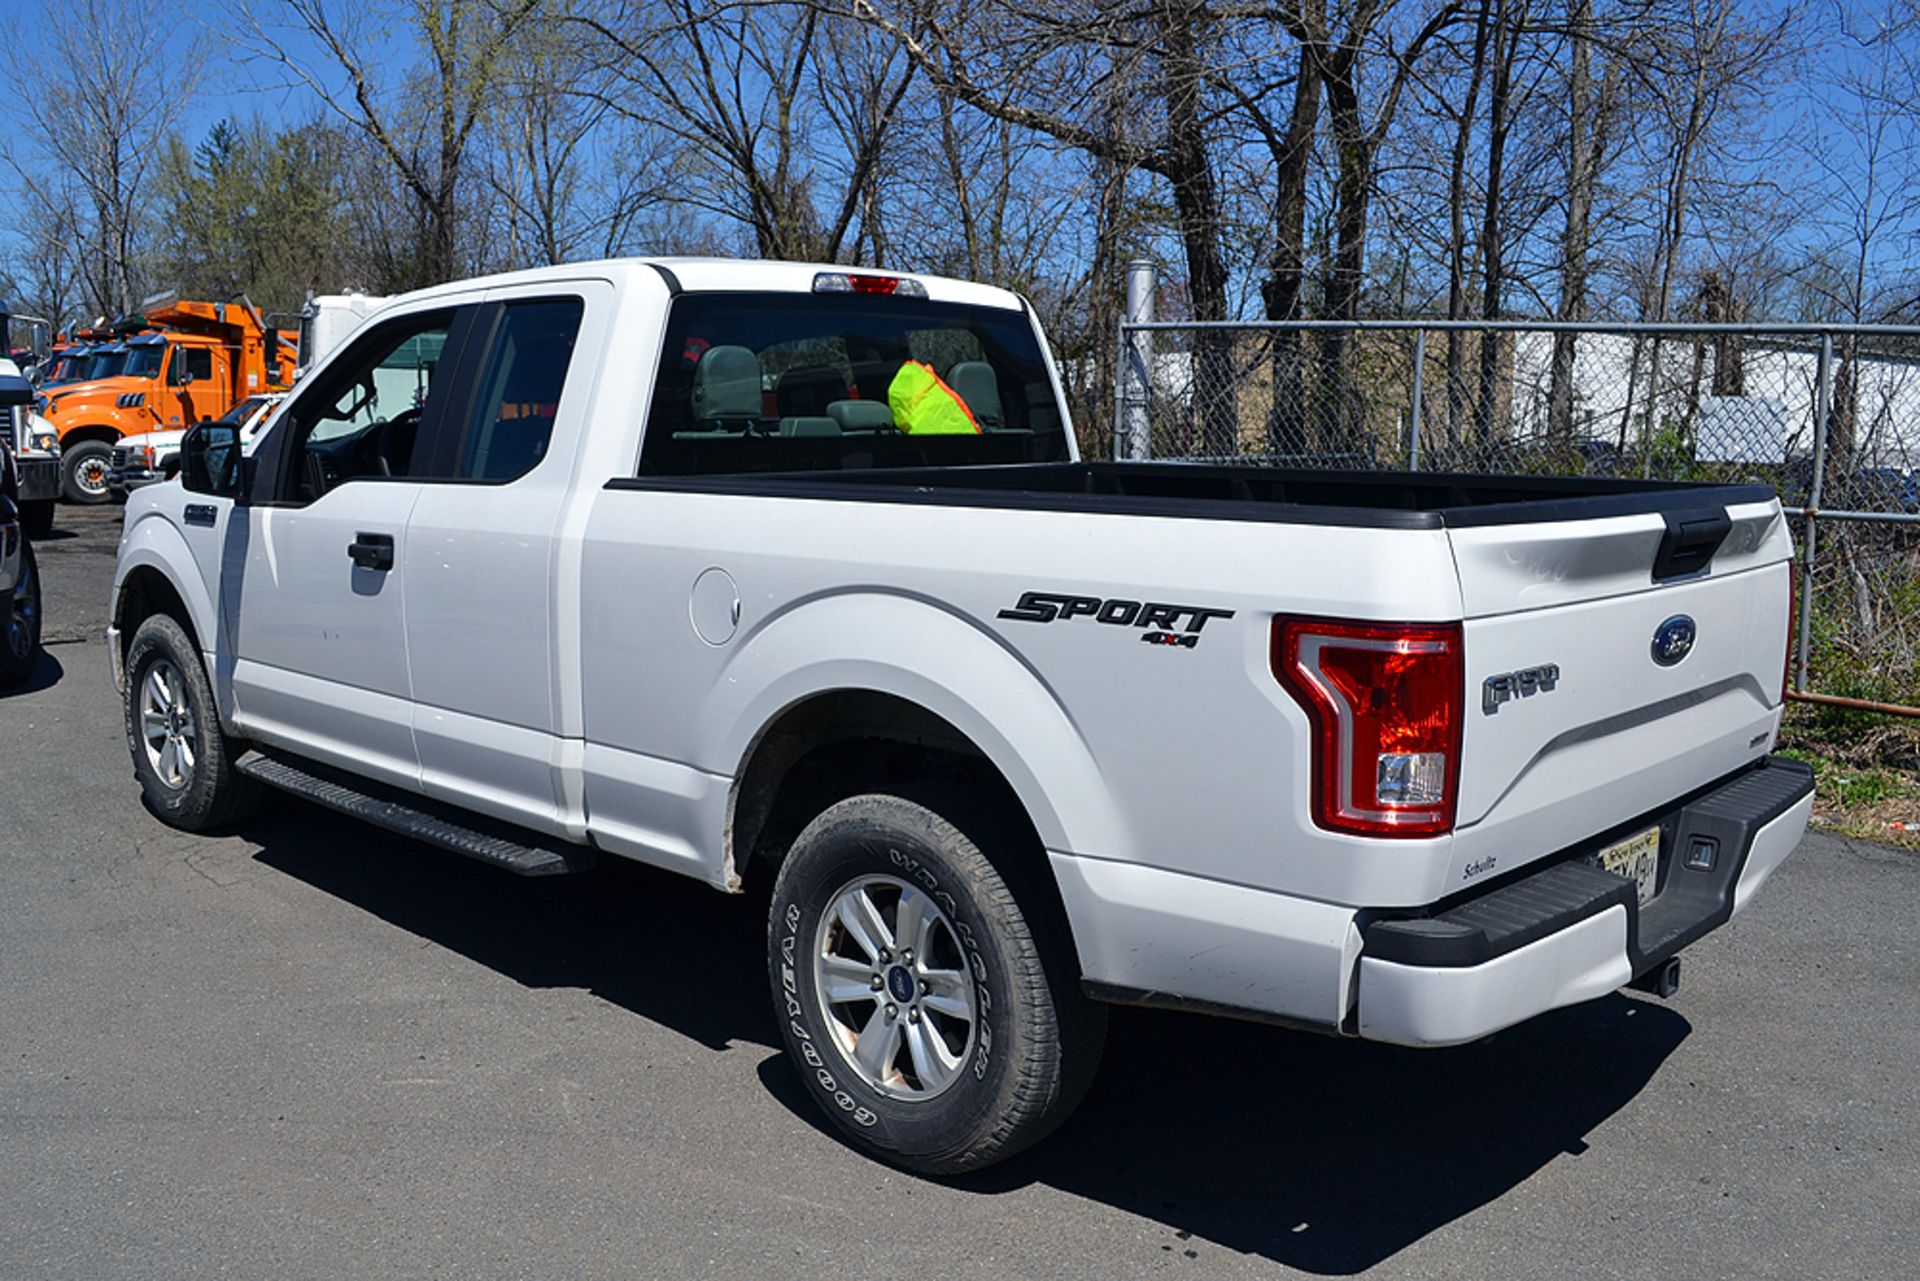 2015 Ford F150 Lariat SuperCab, 4WD Pick Up Truck - Image 2 of 11